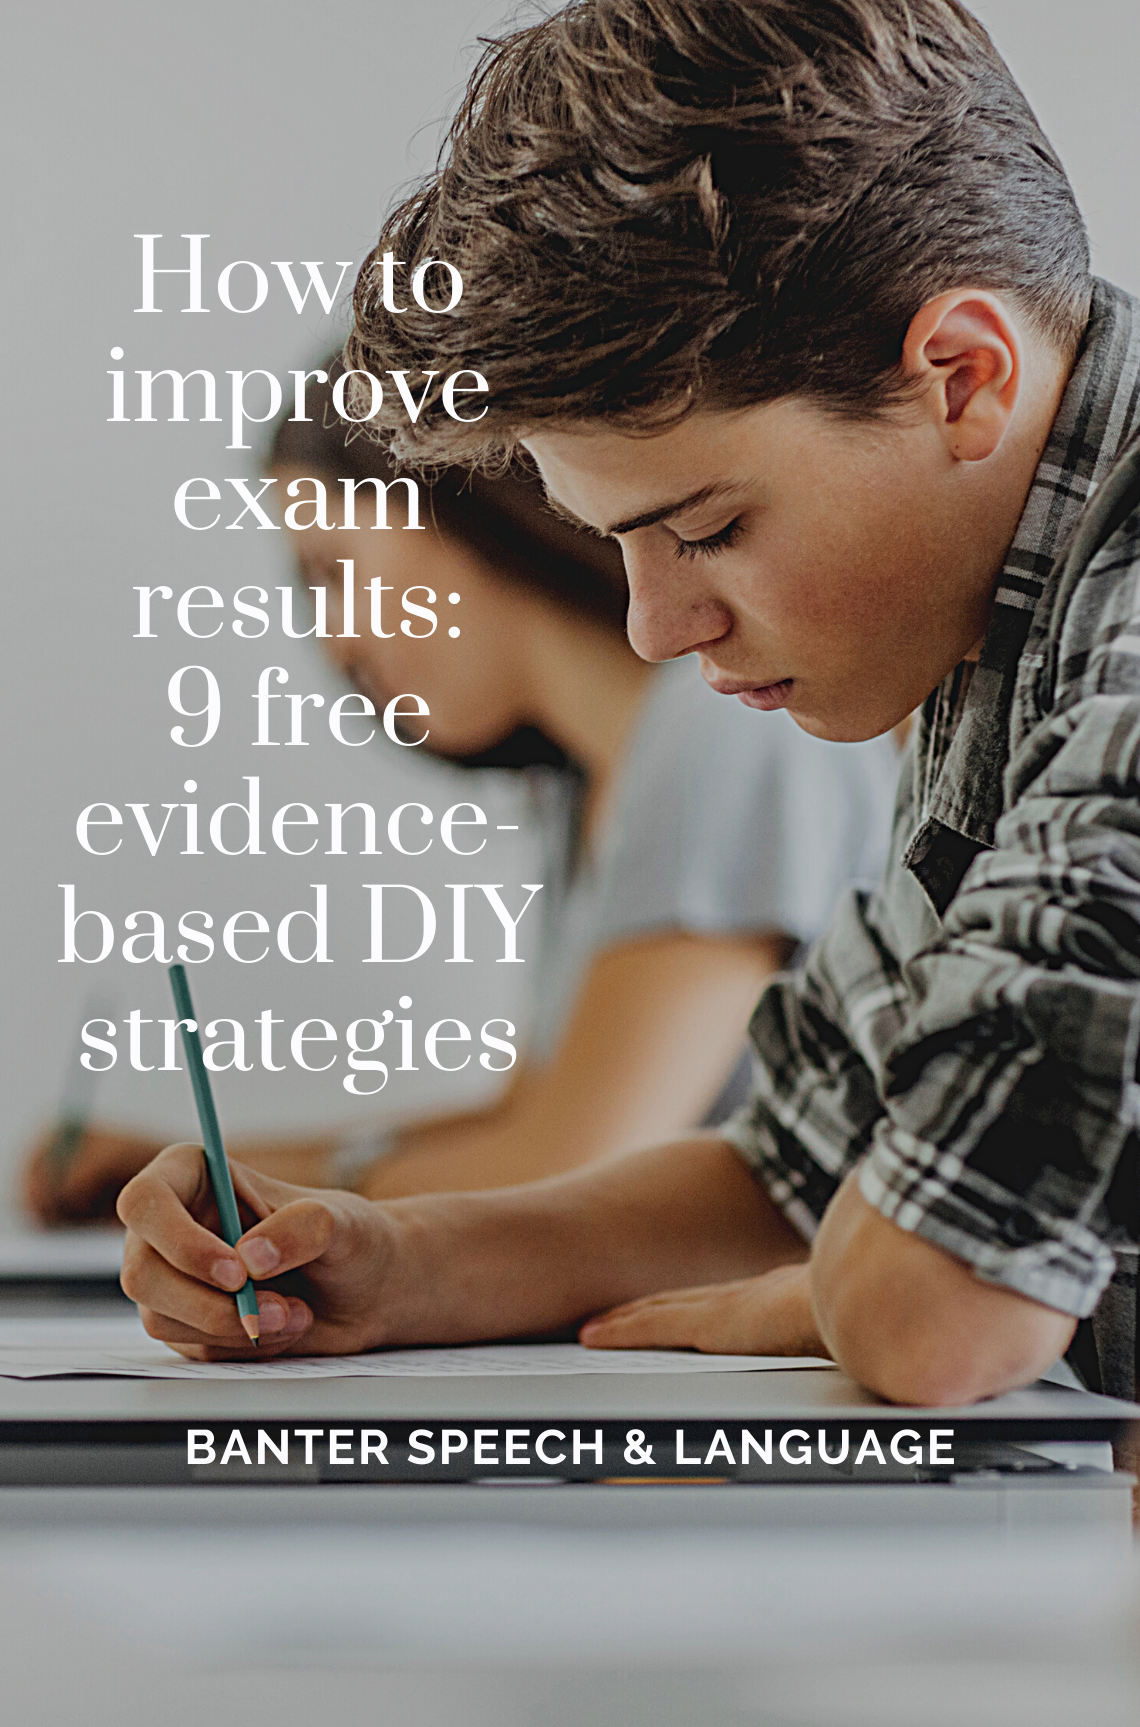 How to improve exam results 9 free evidence-based DIY strategies